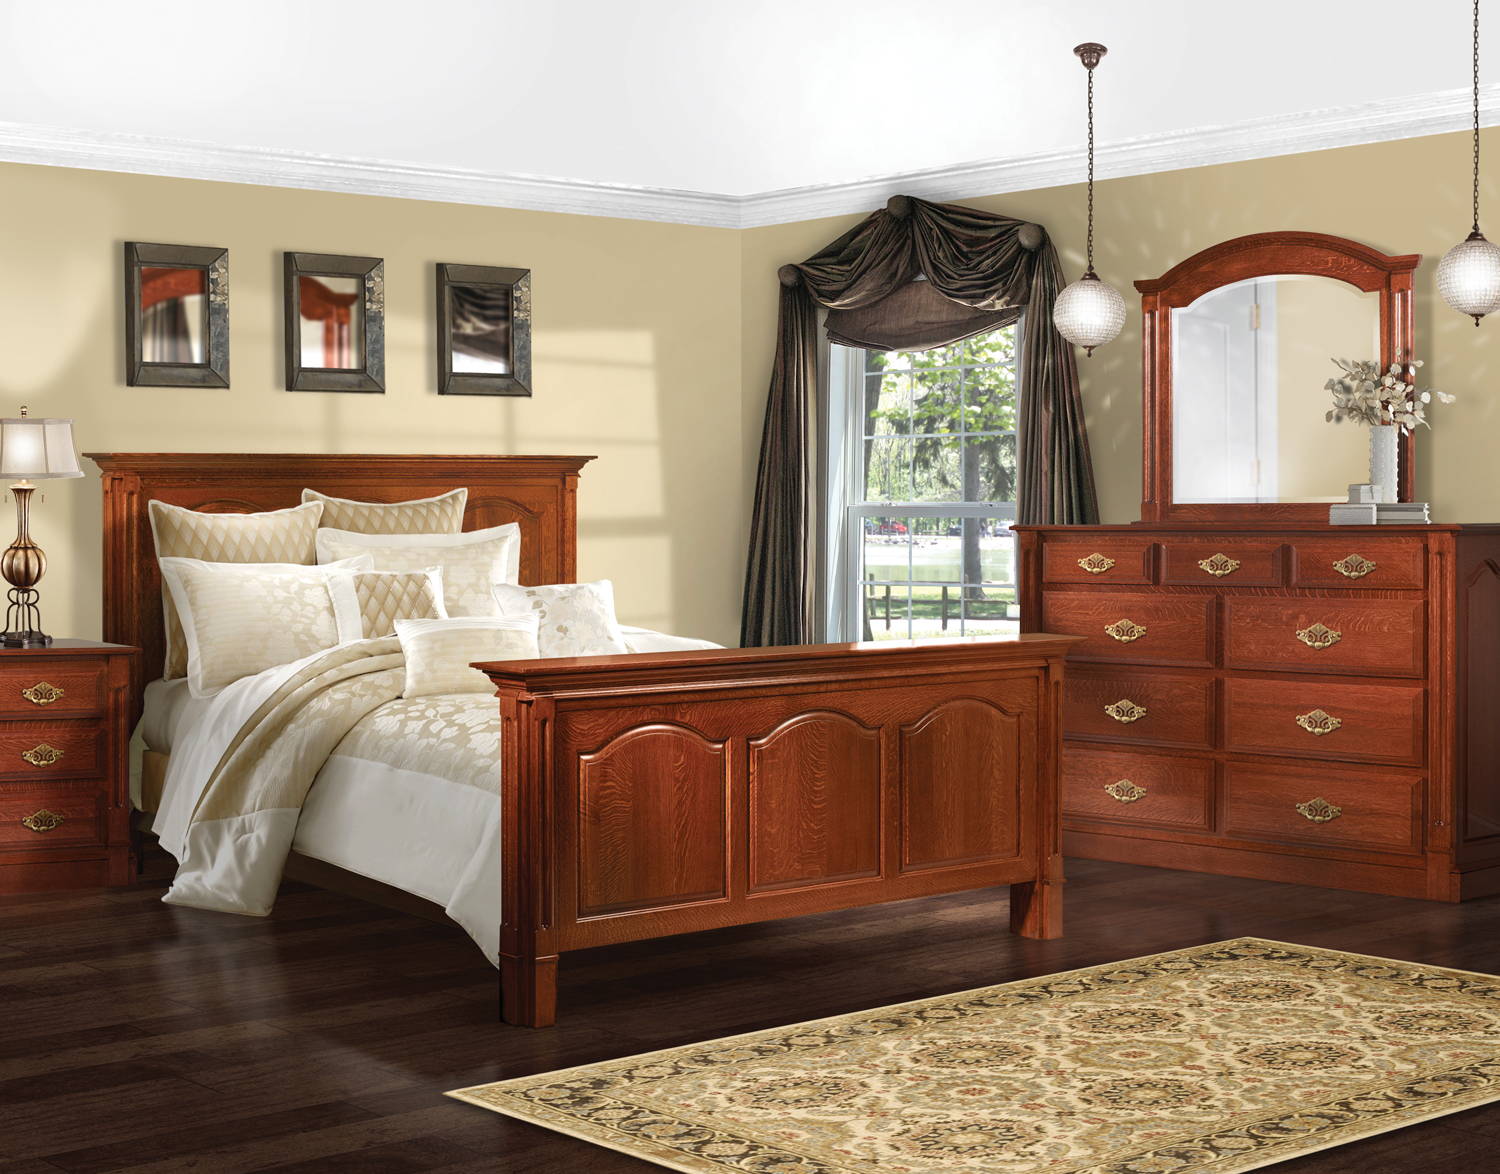 Image of fully customizable Legacy Bedroom Set through Harvest Home Interiors Amish Solid Wood Furniture